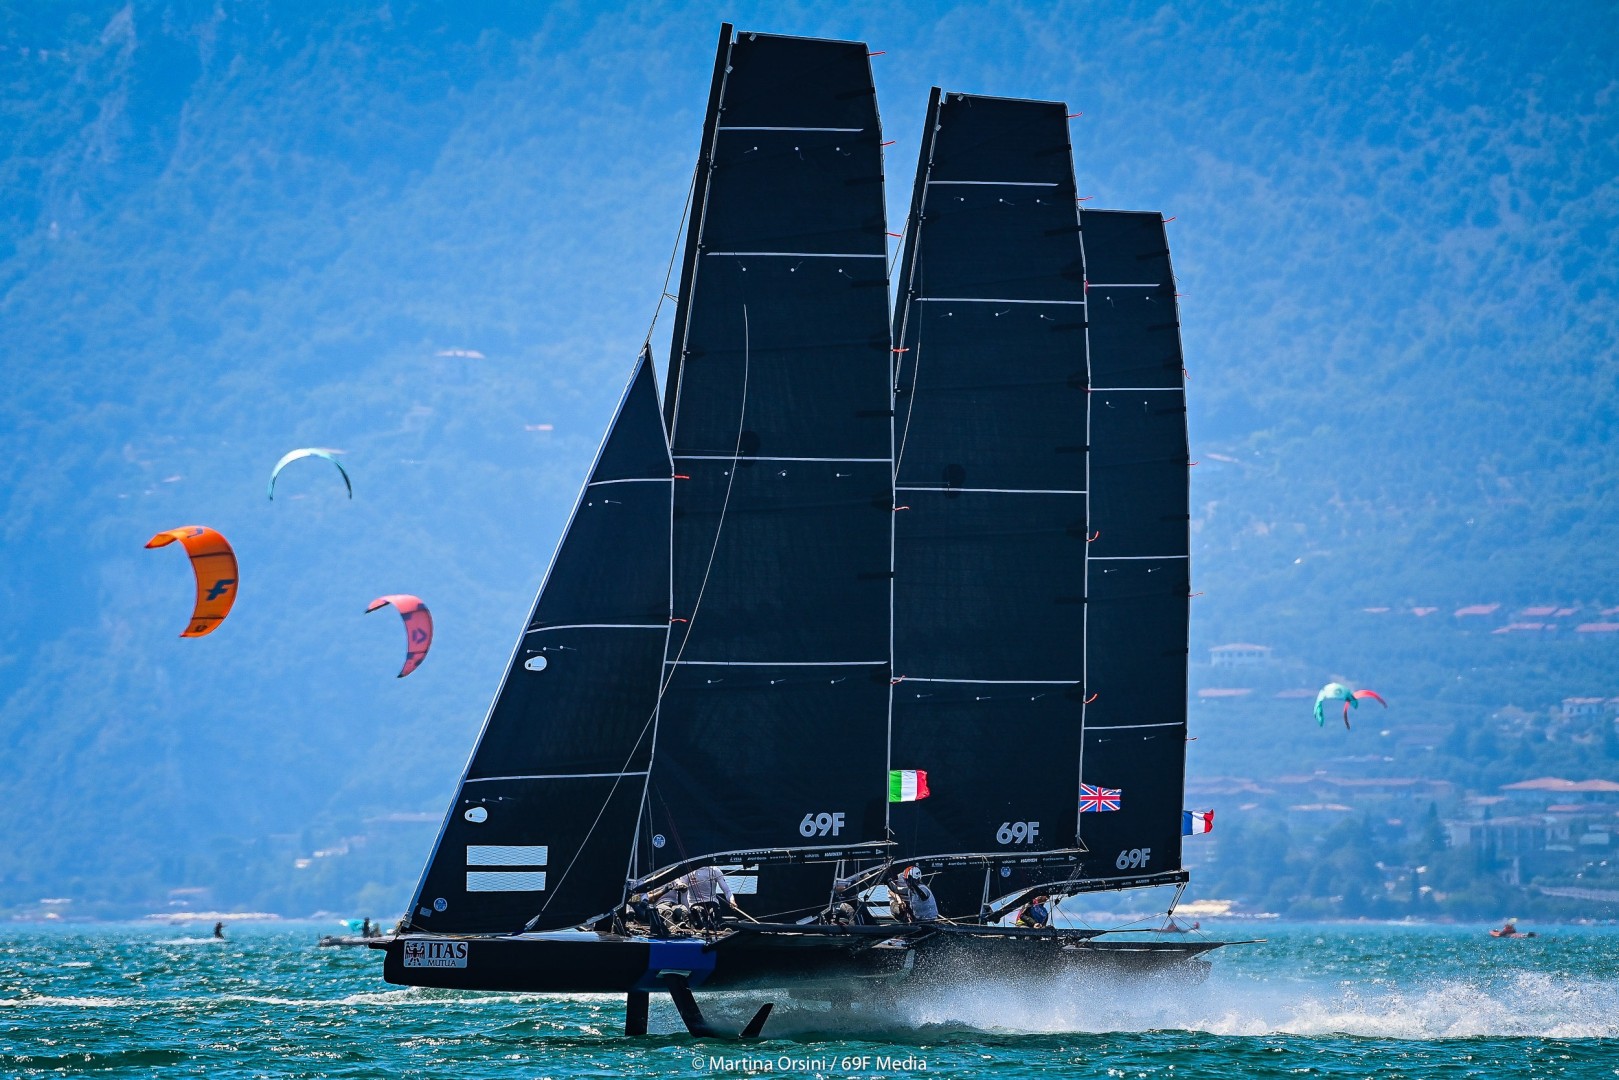 Oceana Vivo vince Act 4 dell'ITAS 69f Youth Foiling Gold Cup